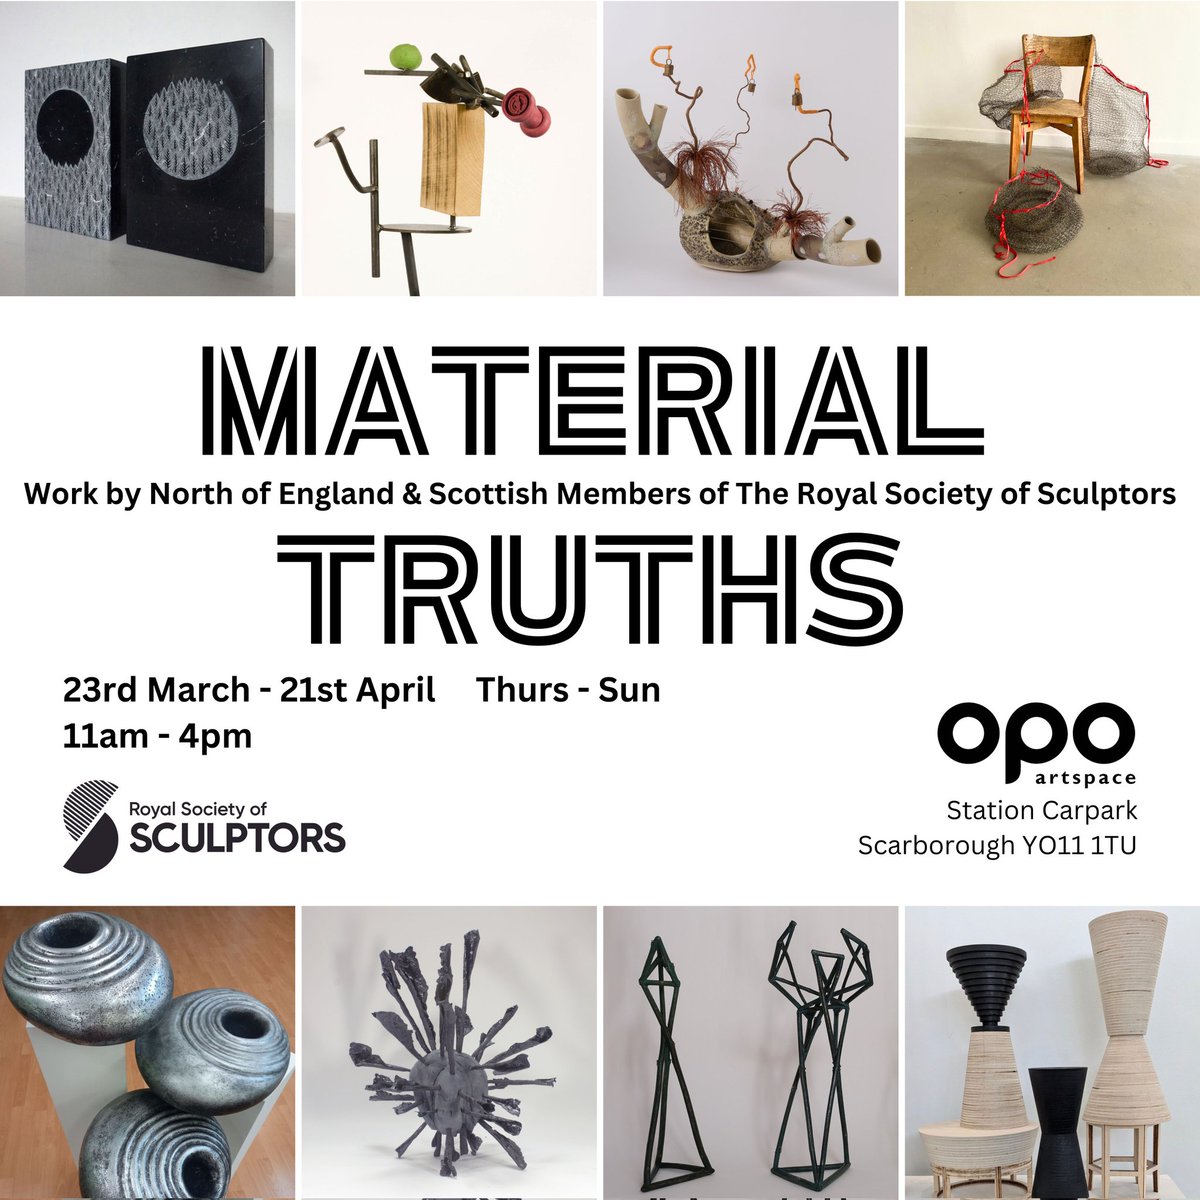 So excited to be part of this show of @Royal_Sculptors members at the Old Parcels Office Space in Scarborough! Open now!!!